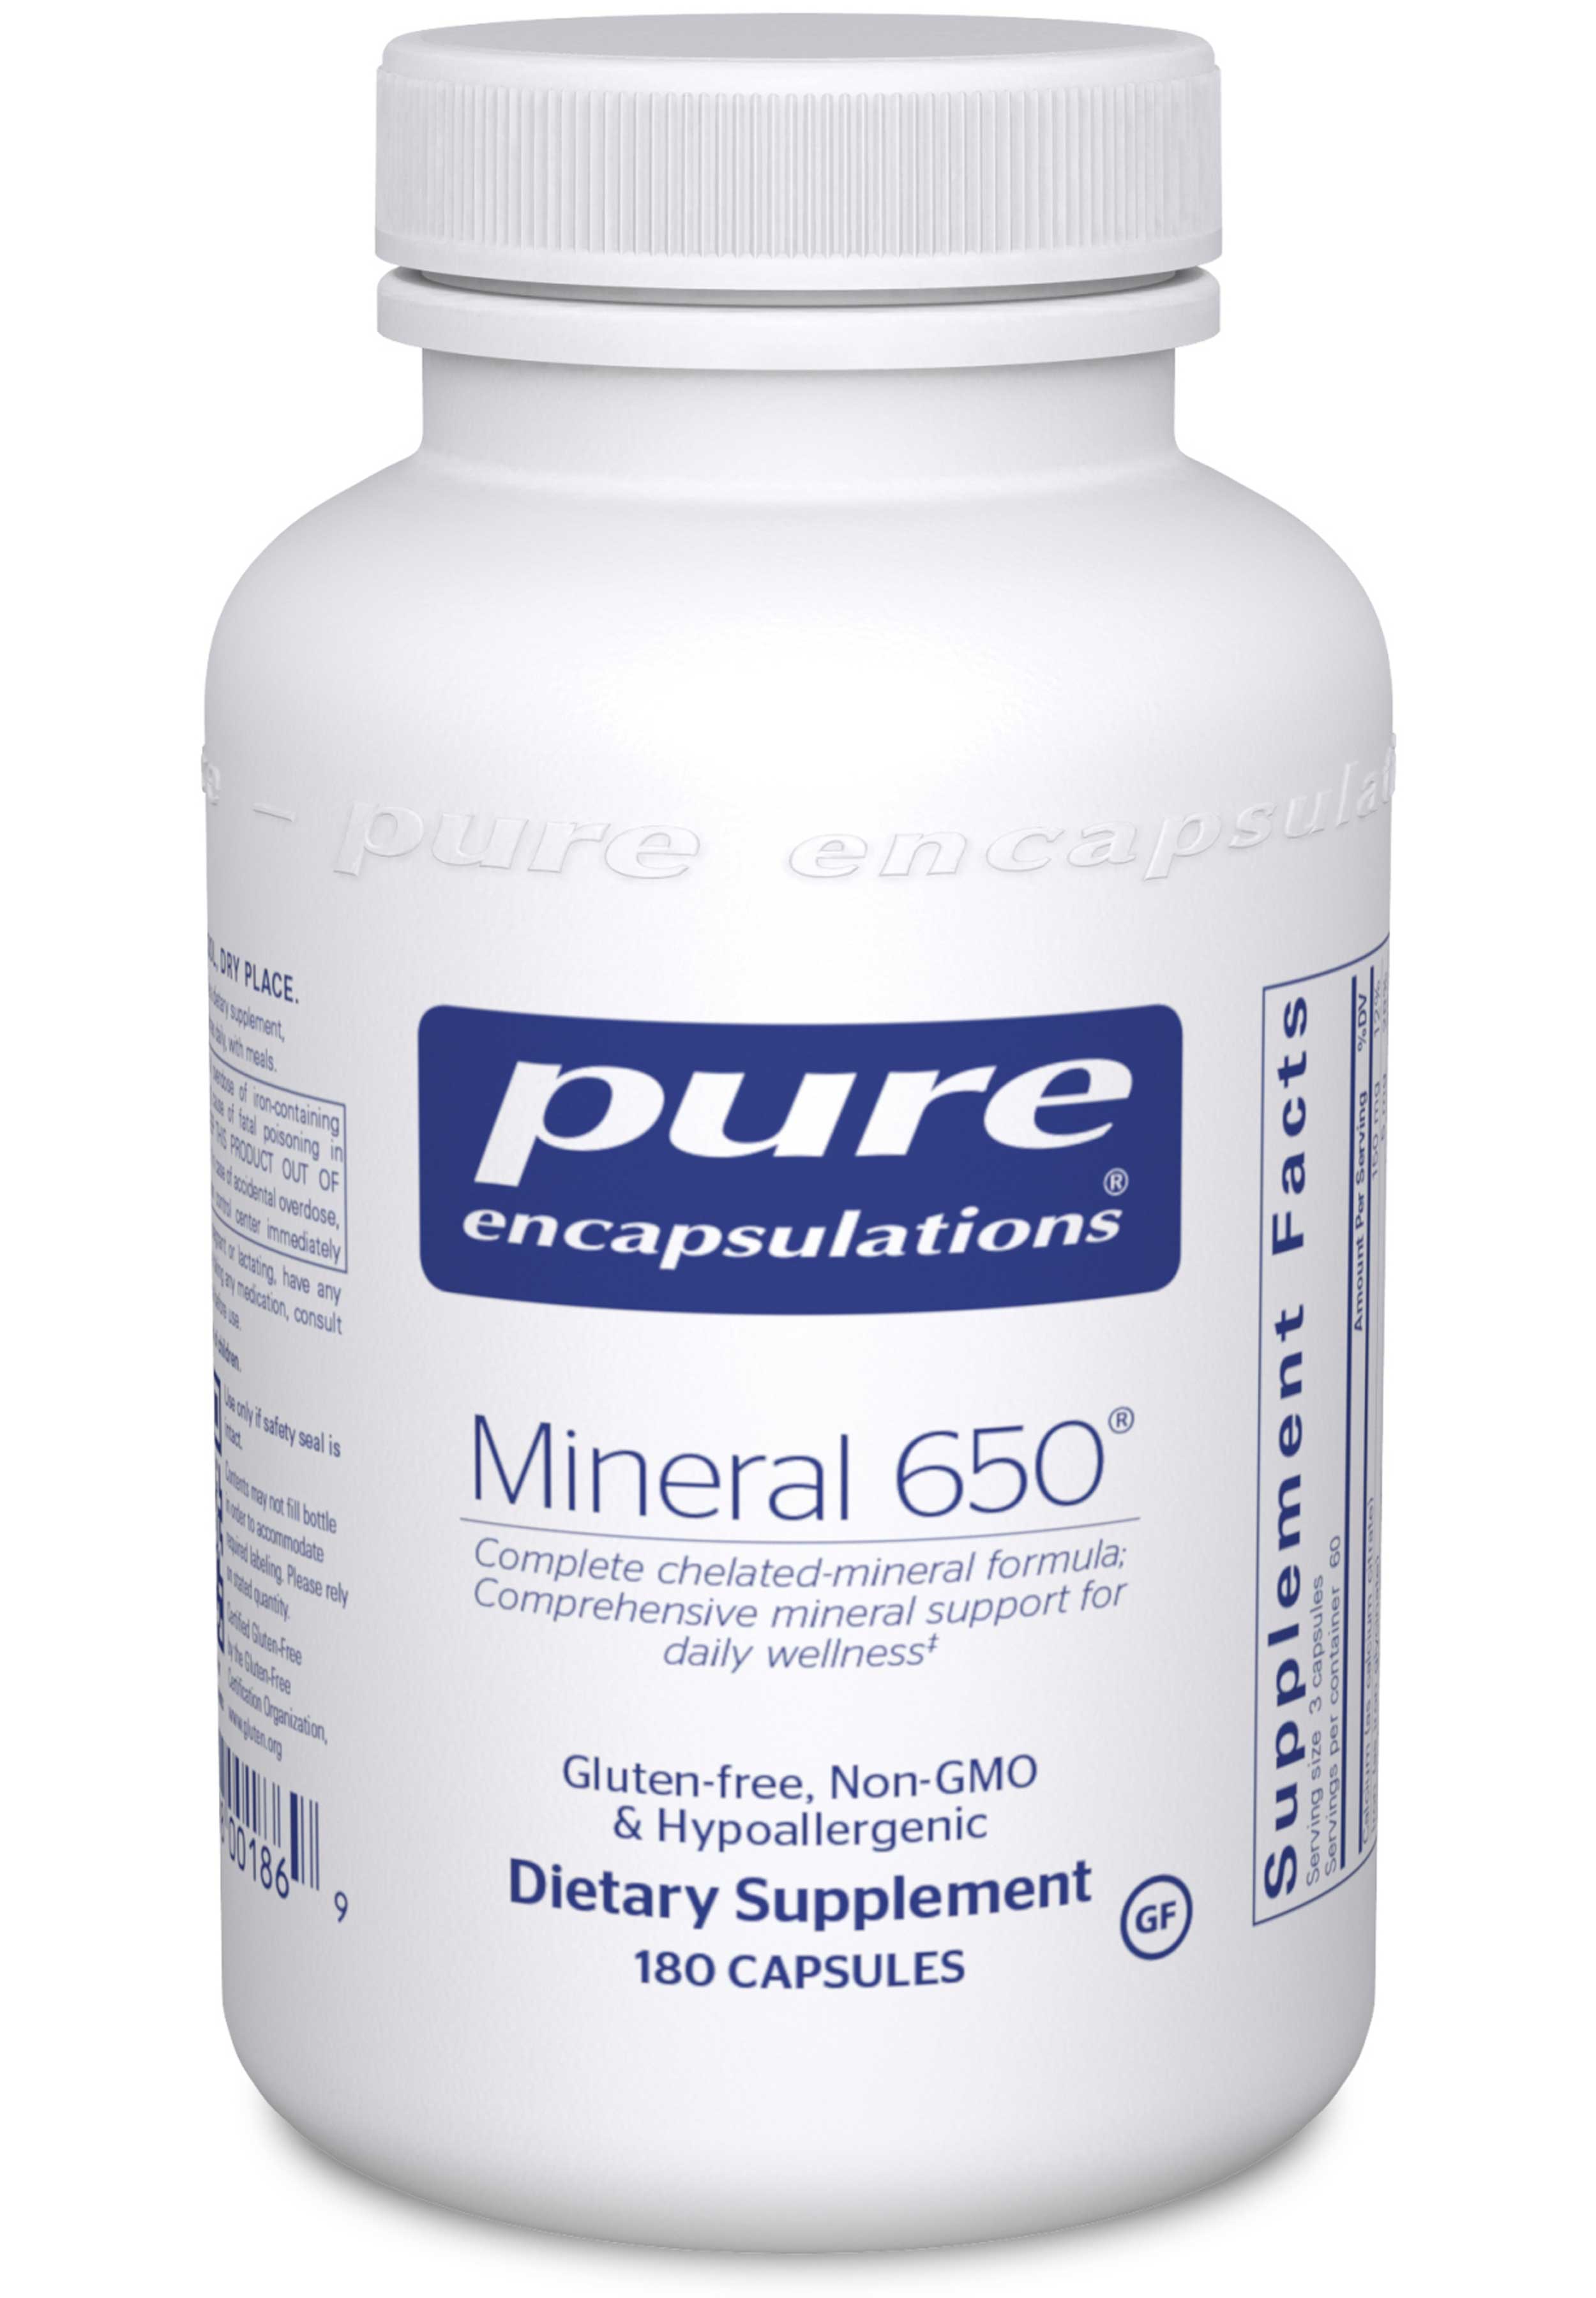 Pure Encapsulations Mineral 650